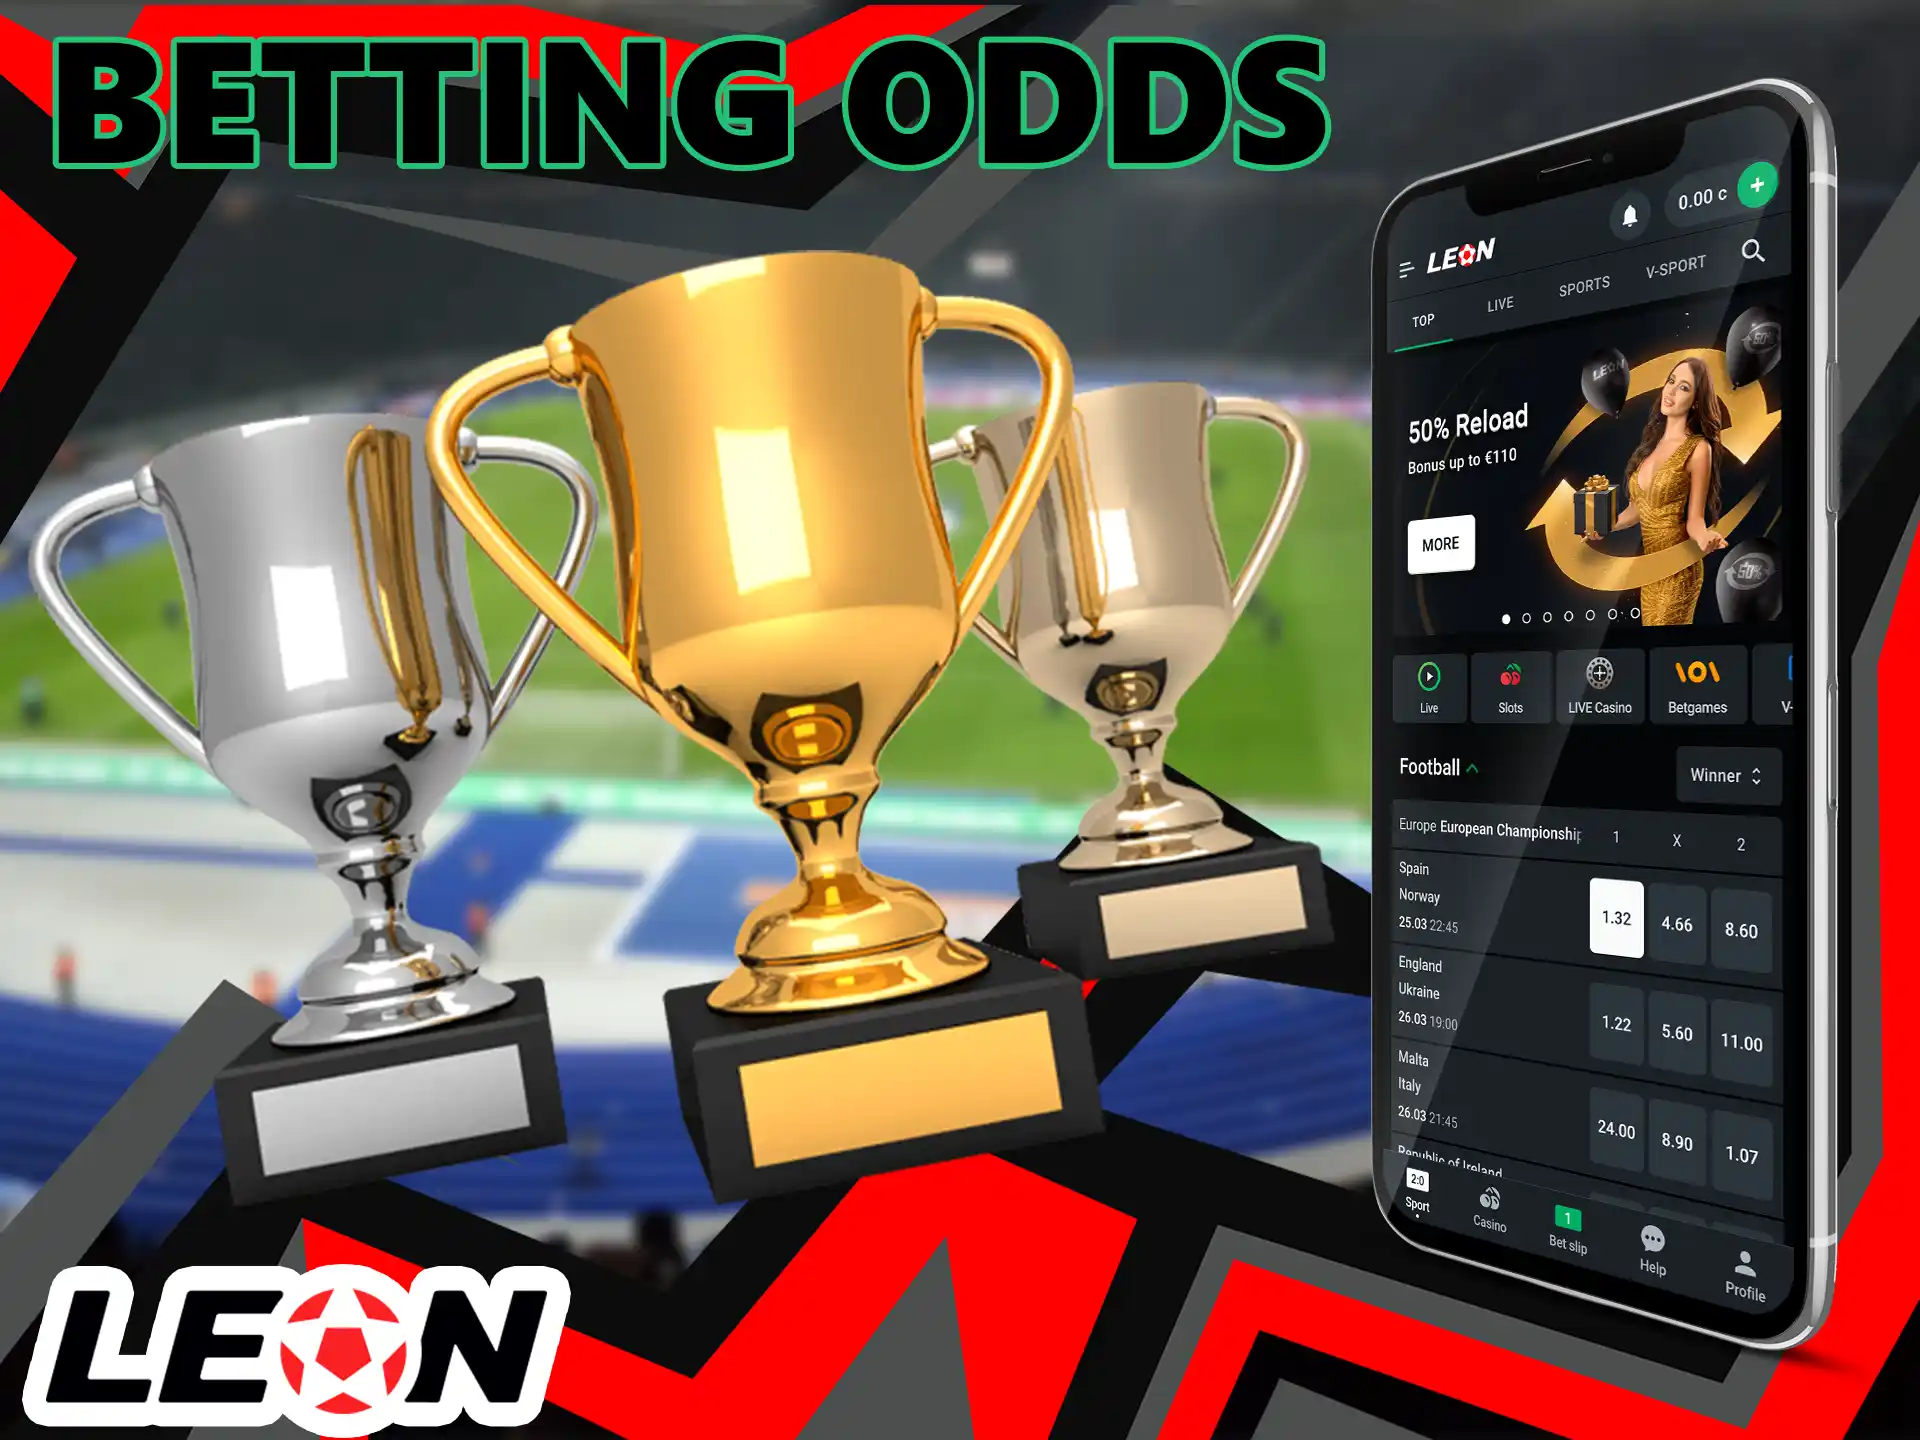 Learn how the coefficients work and how to effectively earn real money betting on the Leon Bet platform.